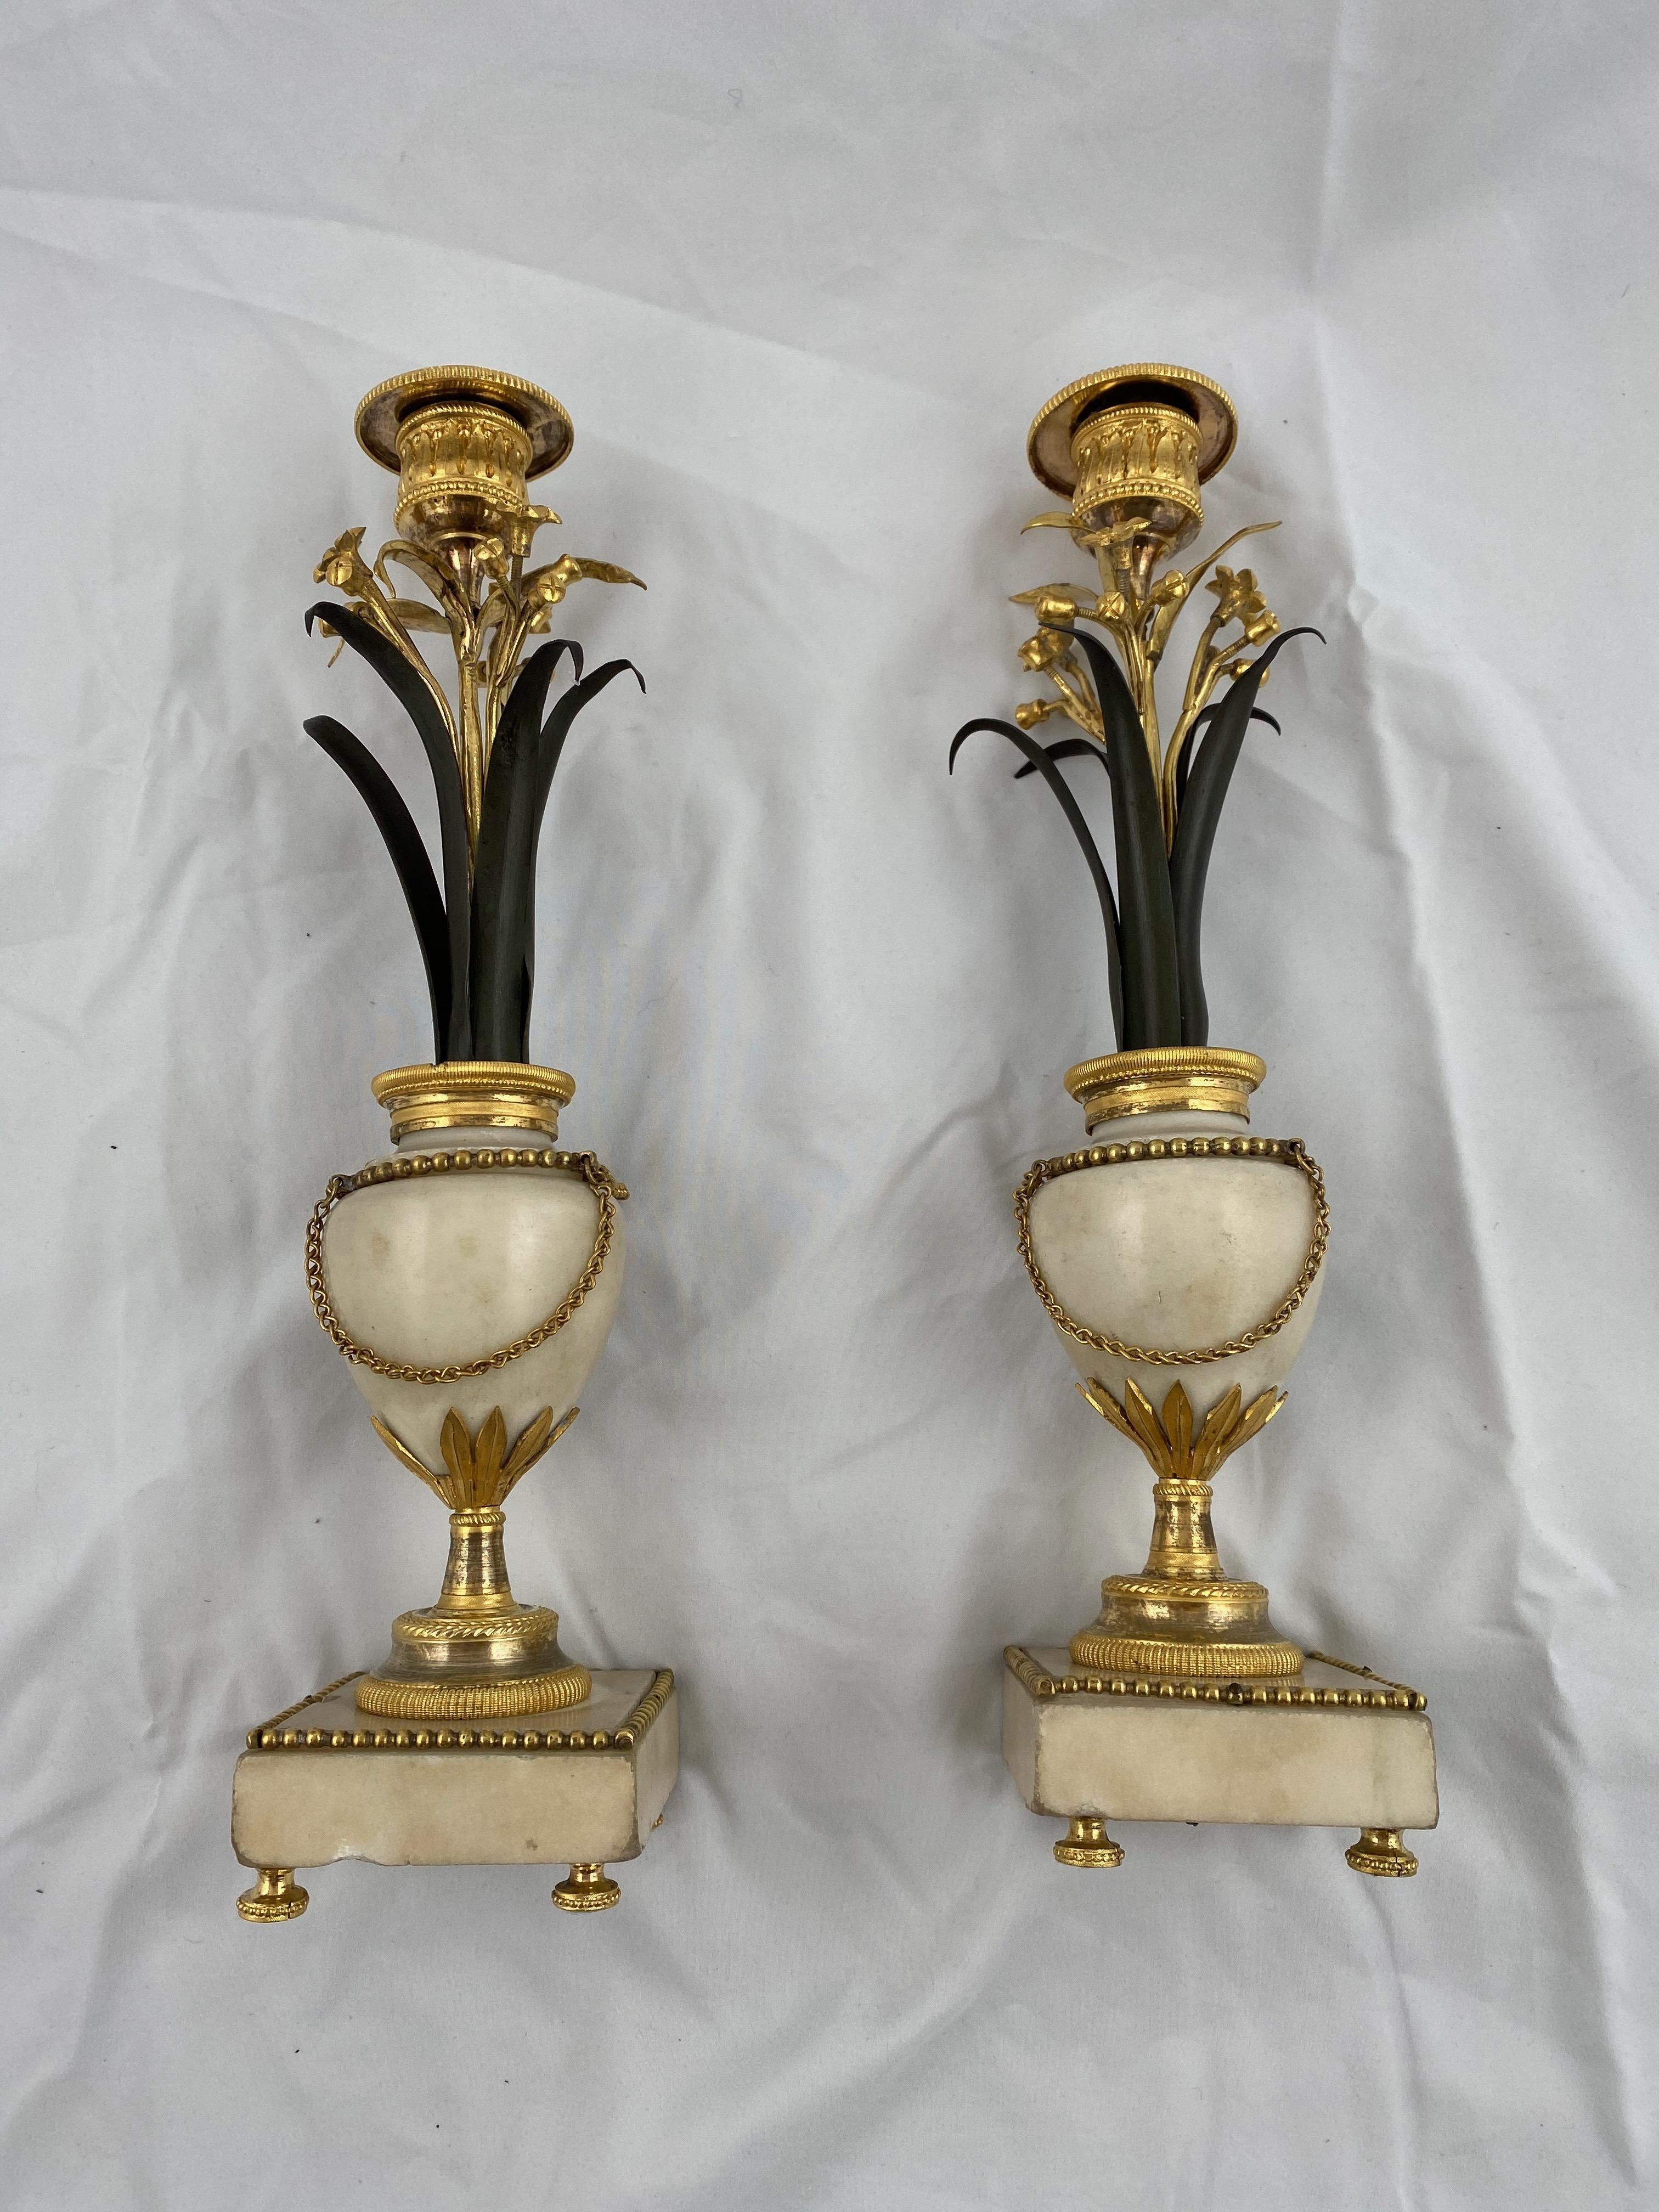 Marble Pair of Candlesticks, Late 18th Century